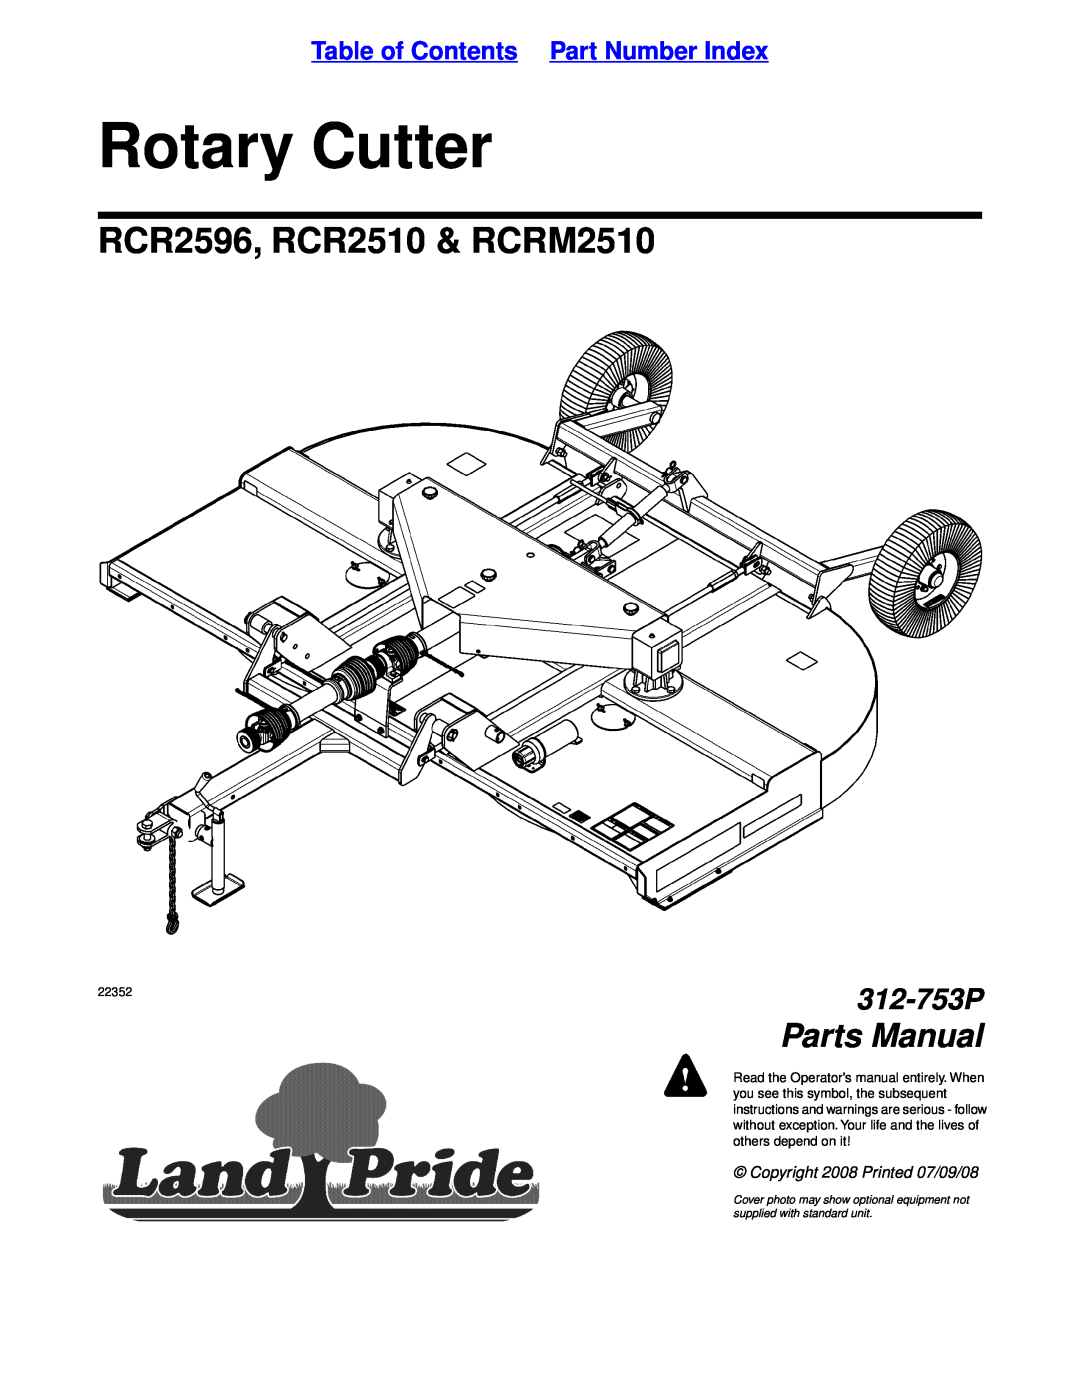 Land Pride manual Table of Contents Part Number Index, Rotary Cutter, RCR2596, RCR2510 & RCRM2510, Parts Manual 